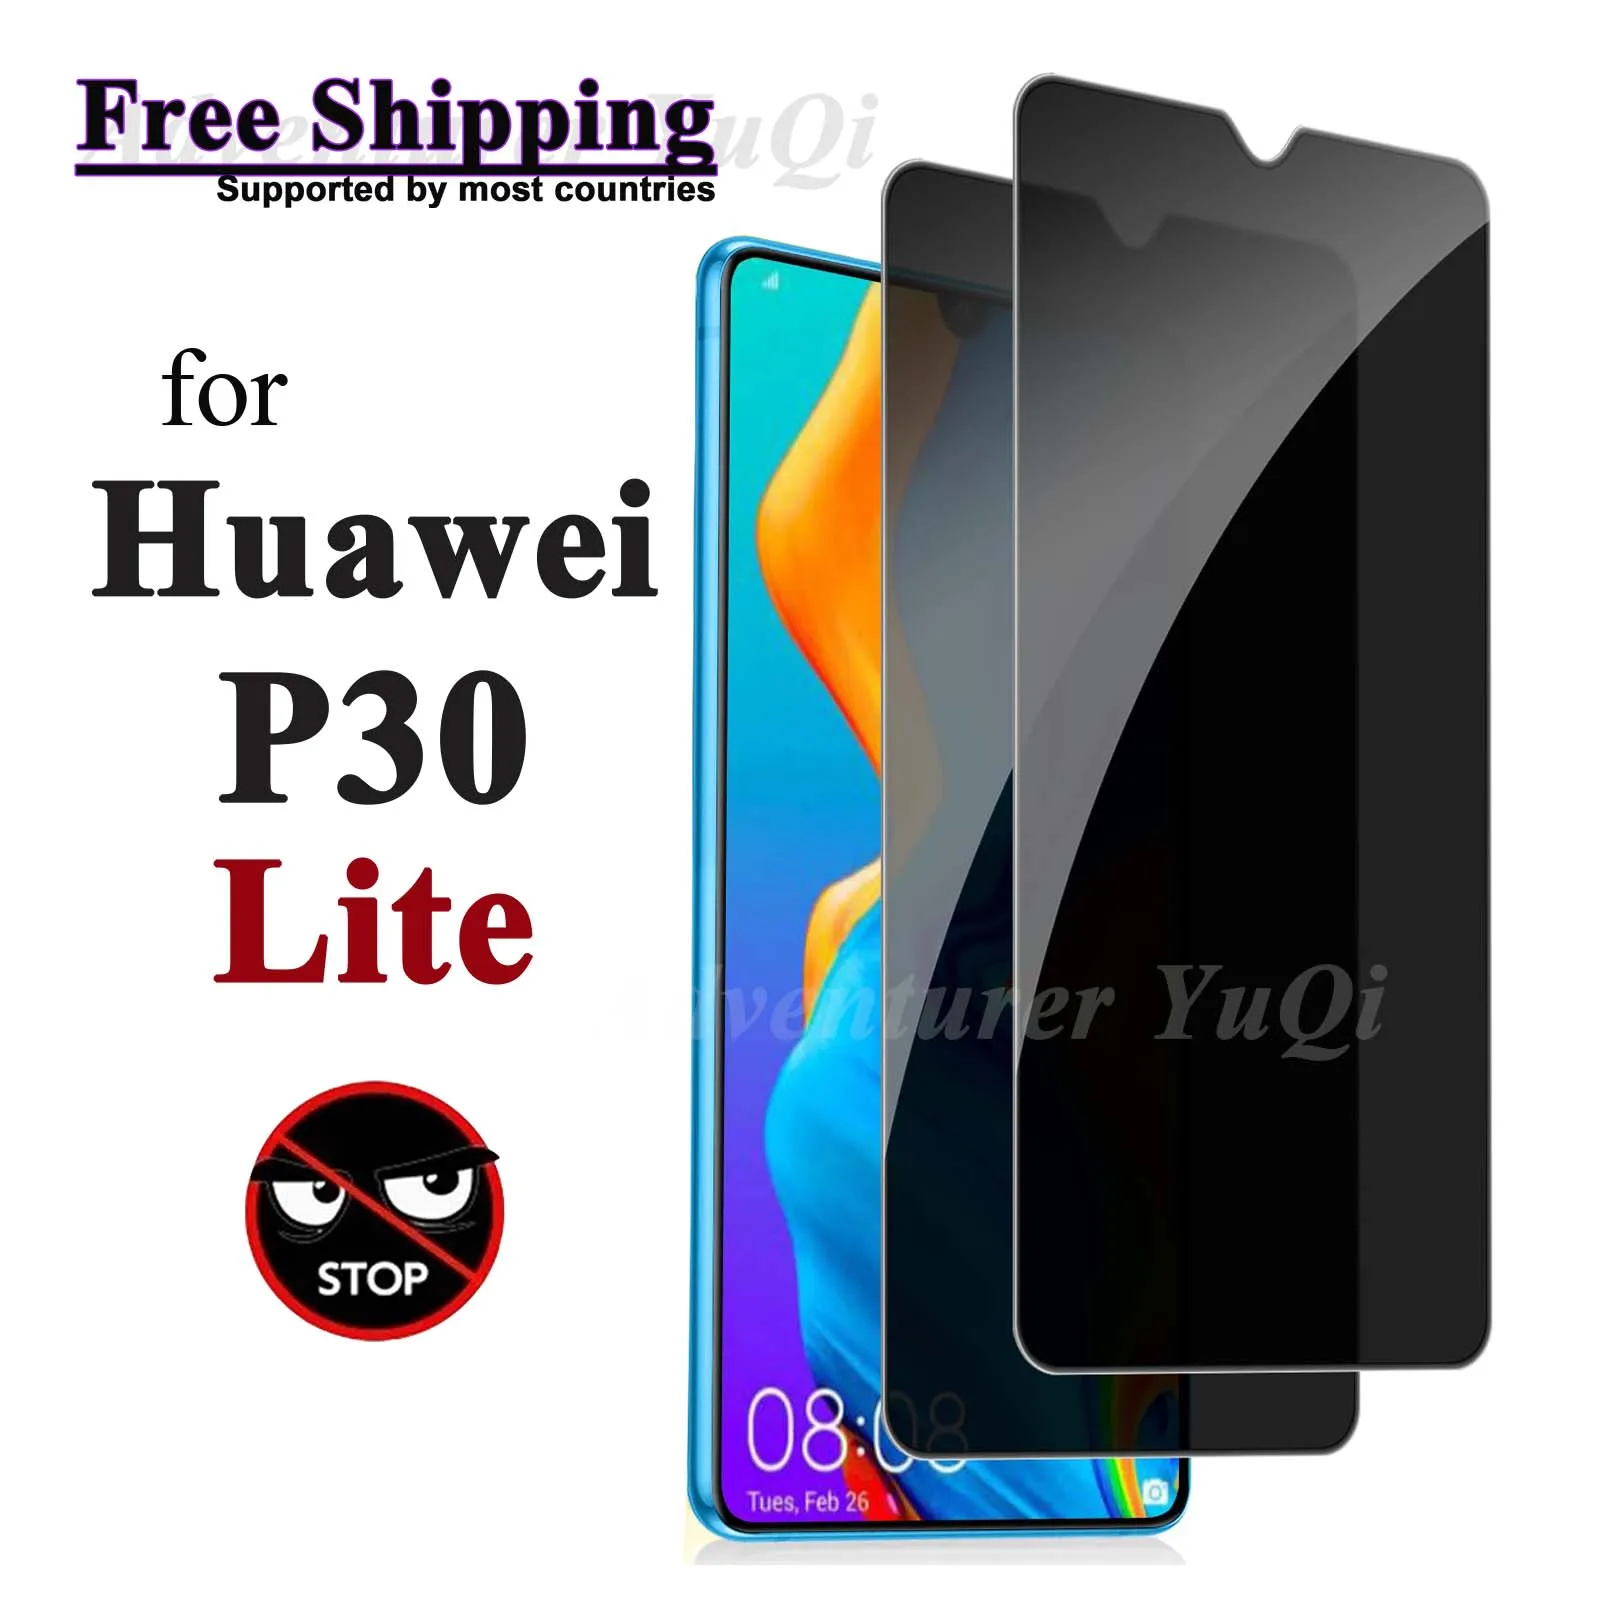 

2-4 pcs Anti Spy Screen Protector For Huawei P30 Lite, Tempered Glass Privacy Anti Peep Scratch 9H Case Friendly Free Shipping